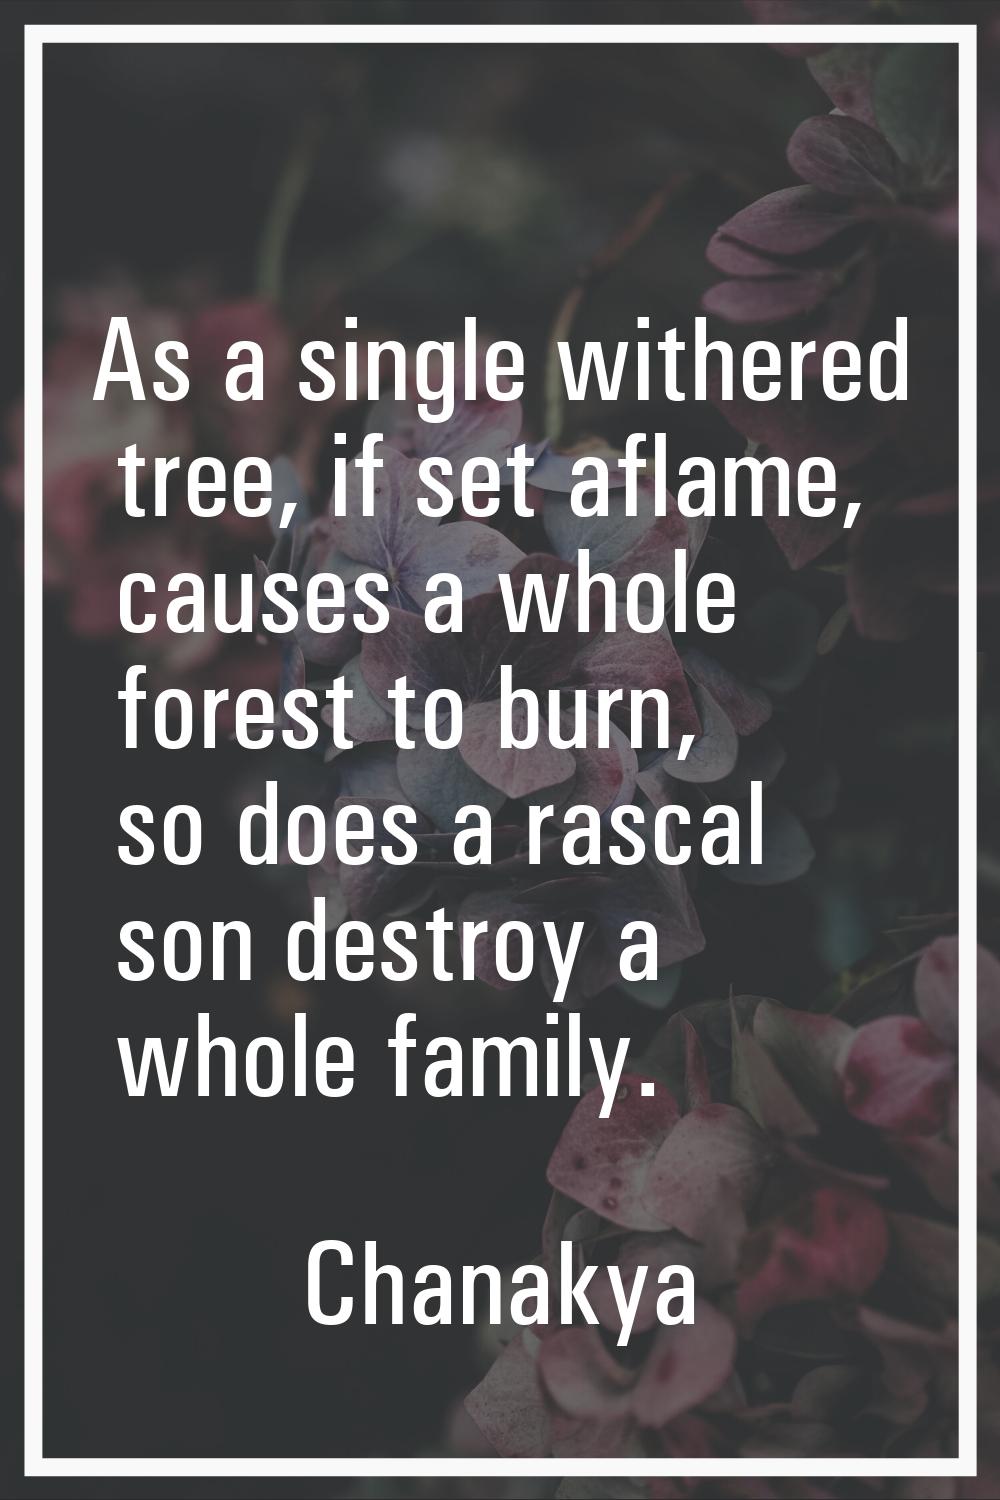 As a single withered tree, if set aflame, causes a whole forest to burn, so does a rascal son destr